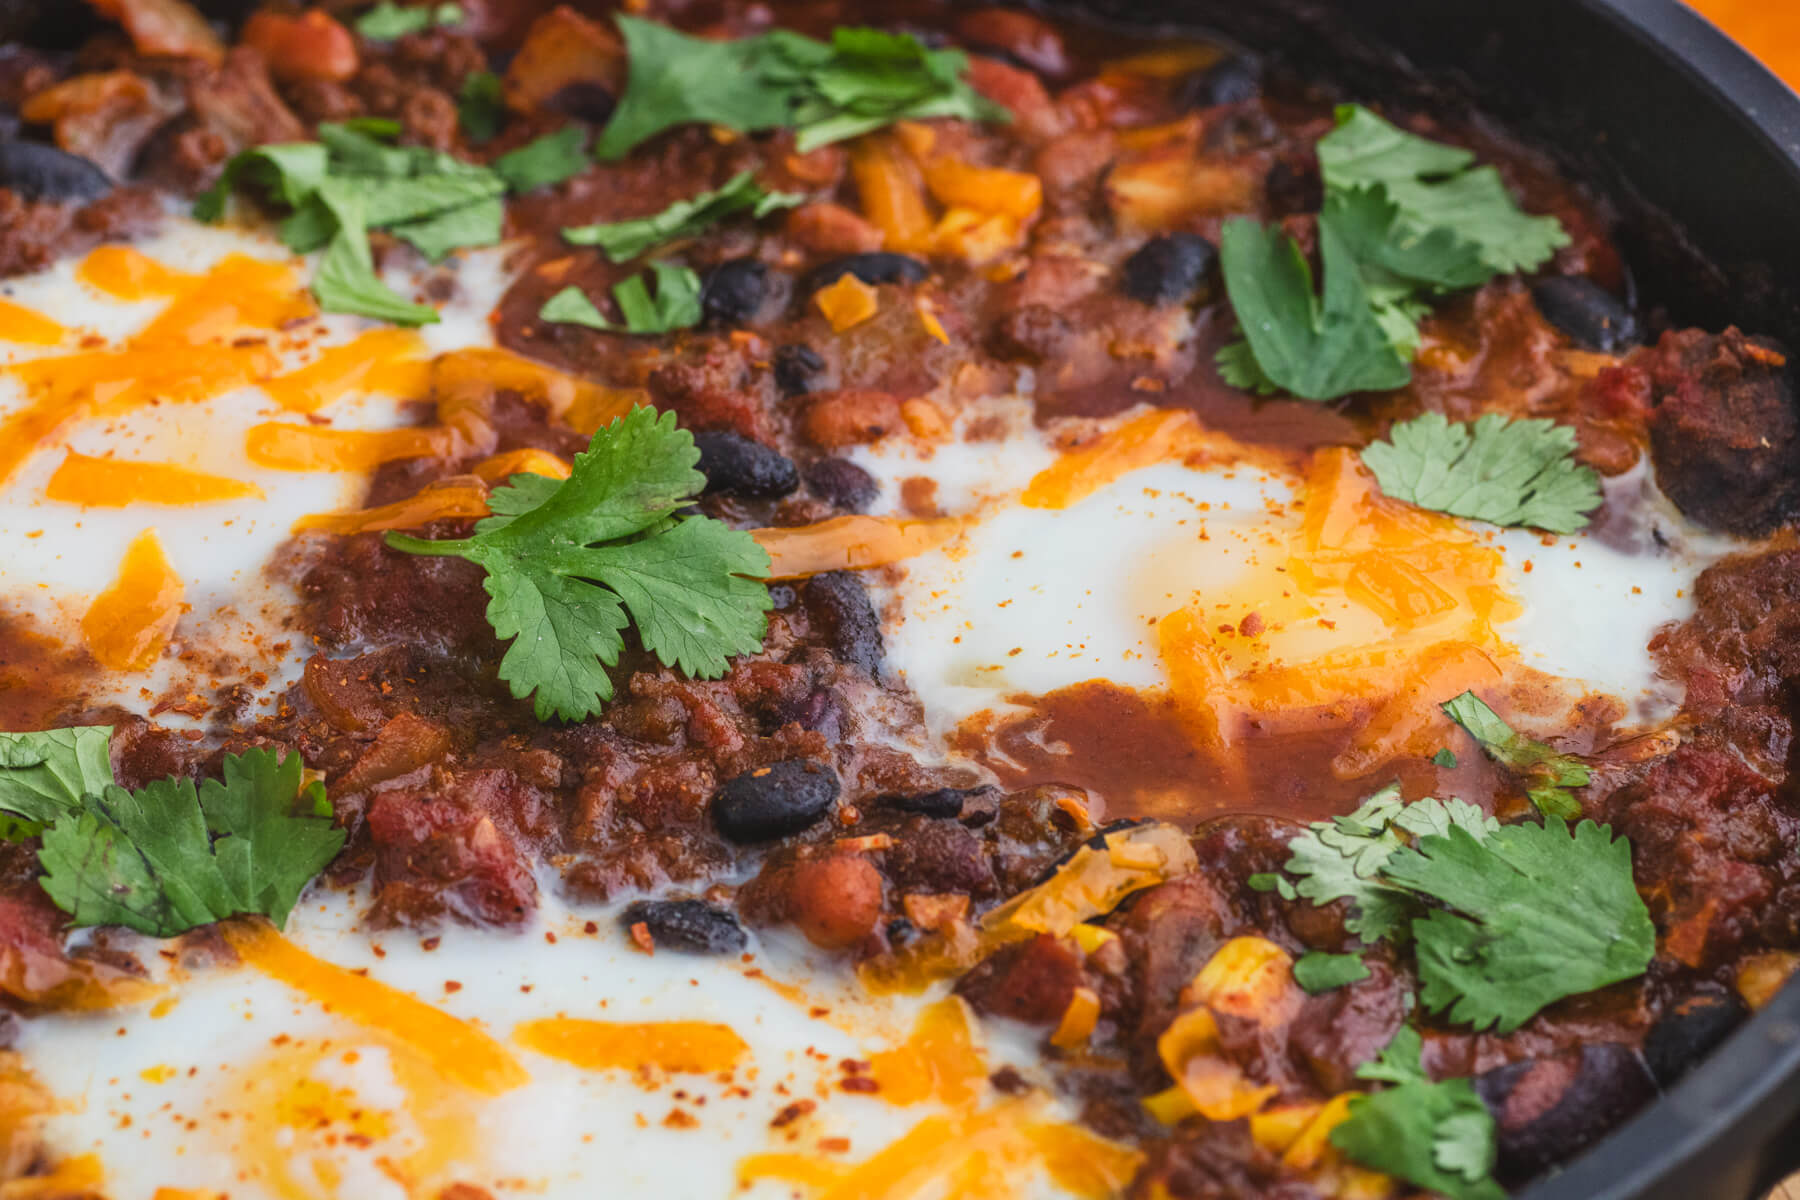 Close up image of baked chili and eggs in a cast iron pan.